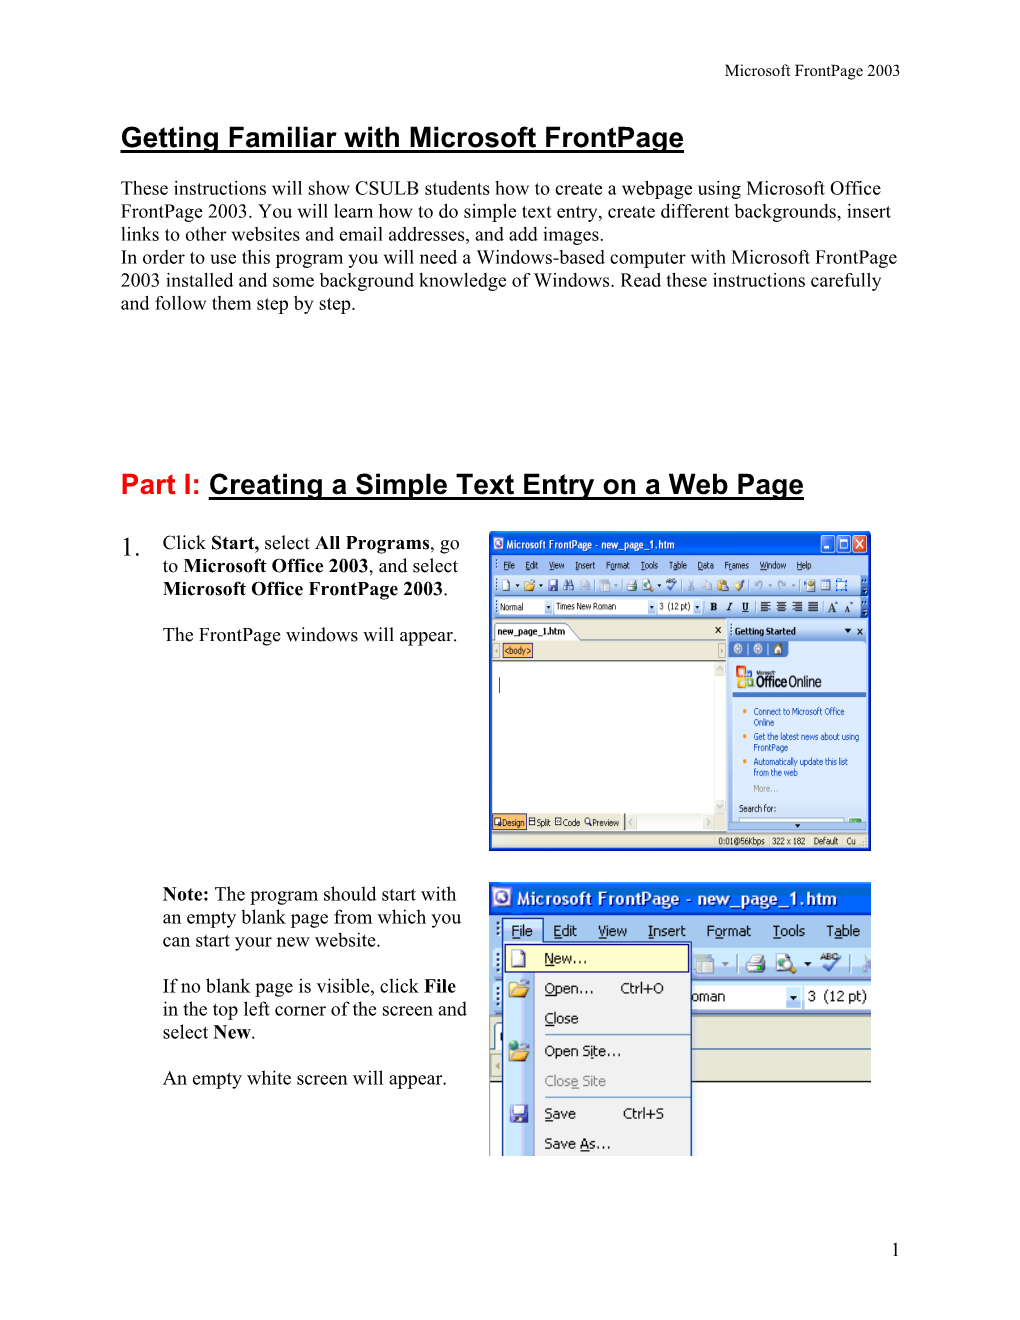 Getting Familiar with Microsoft Frontpage Part I: Creating a Simple